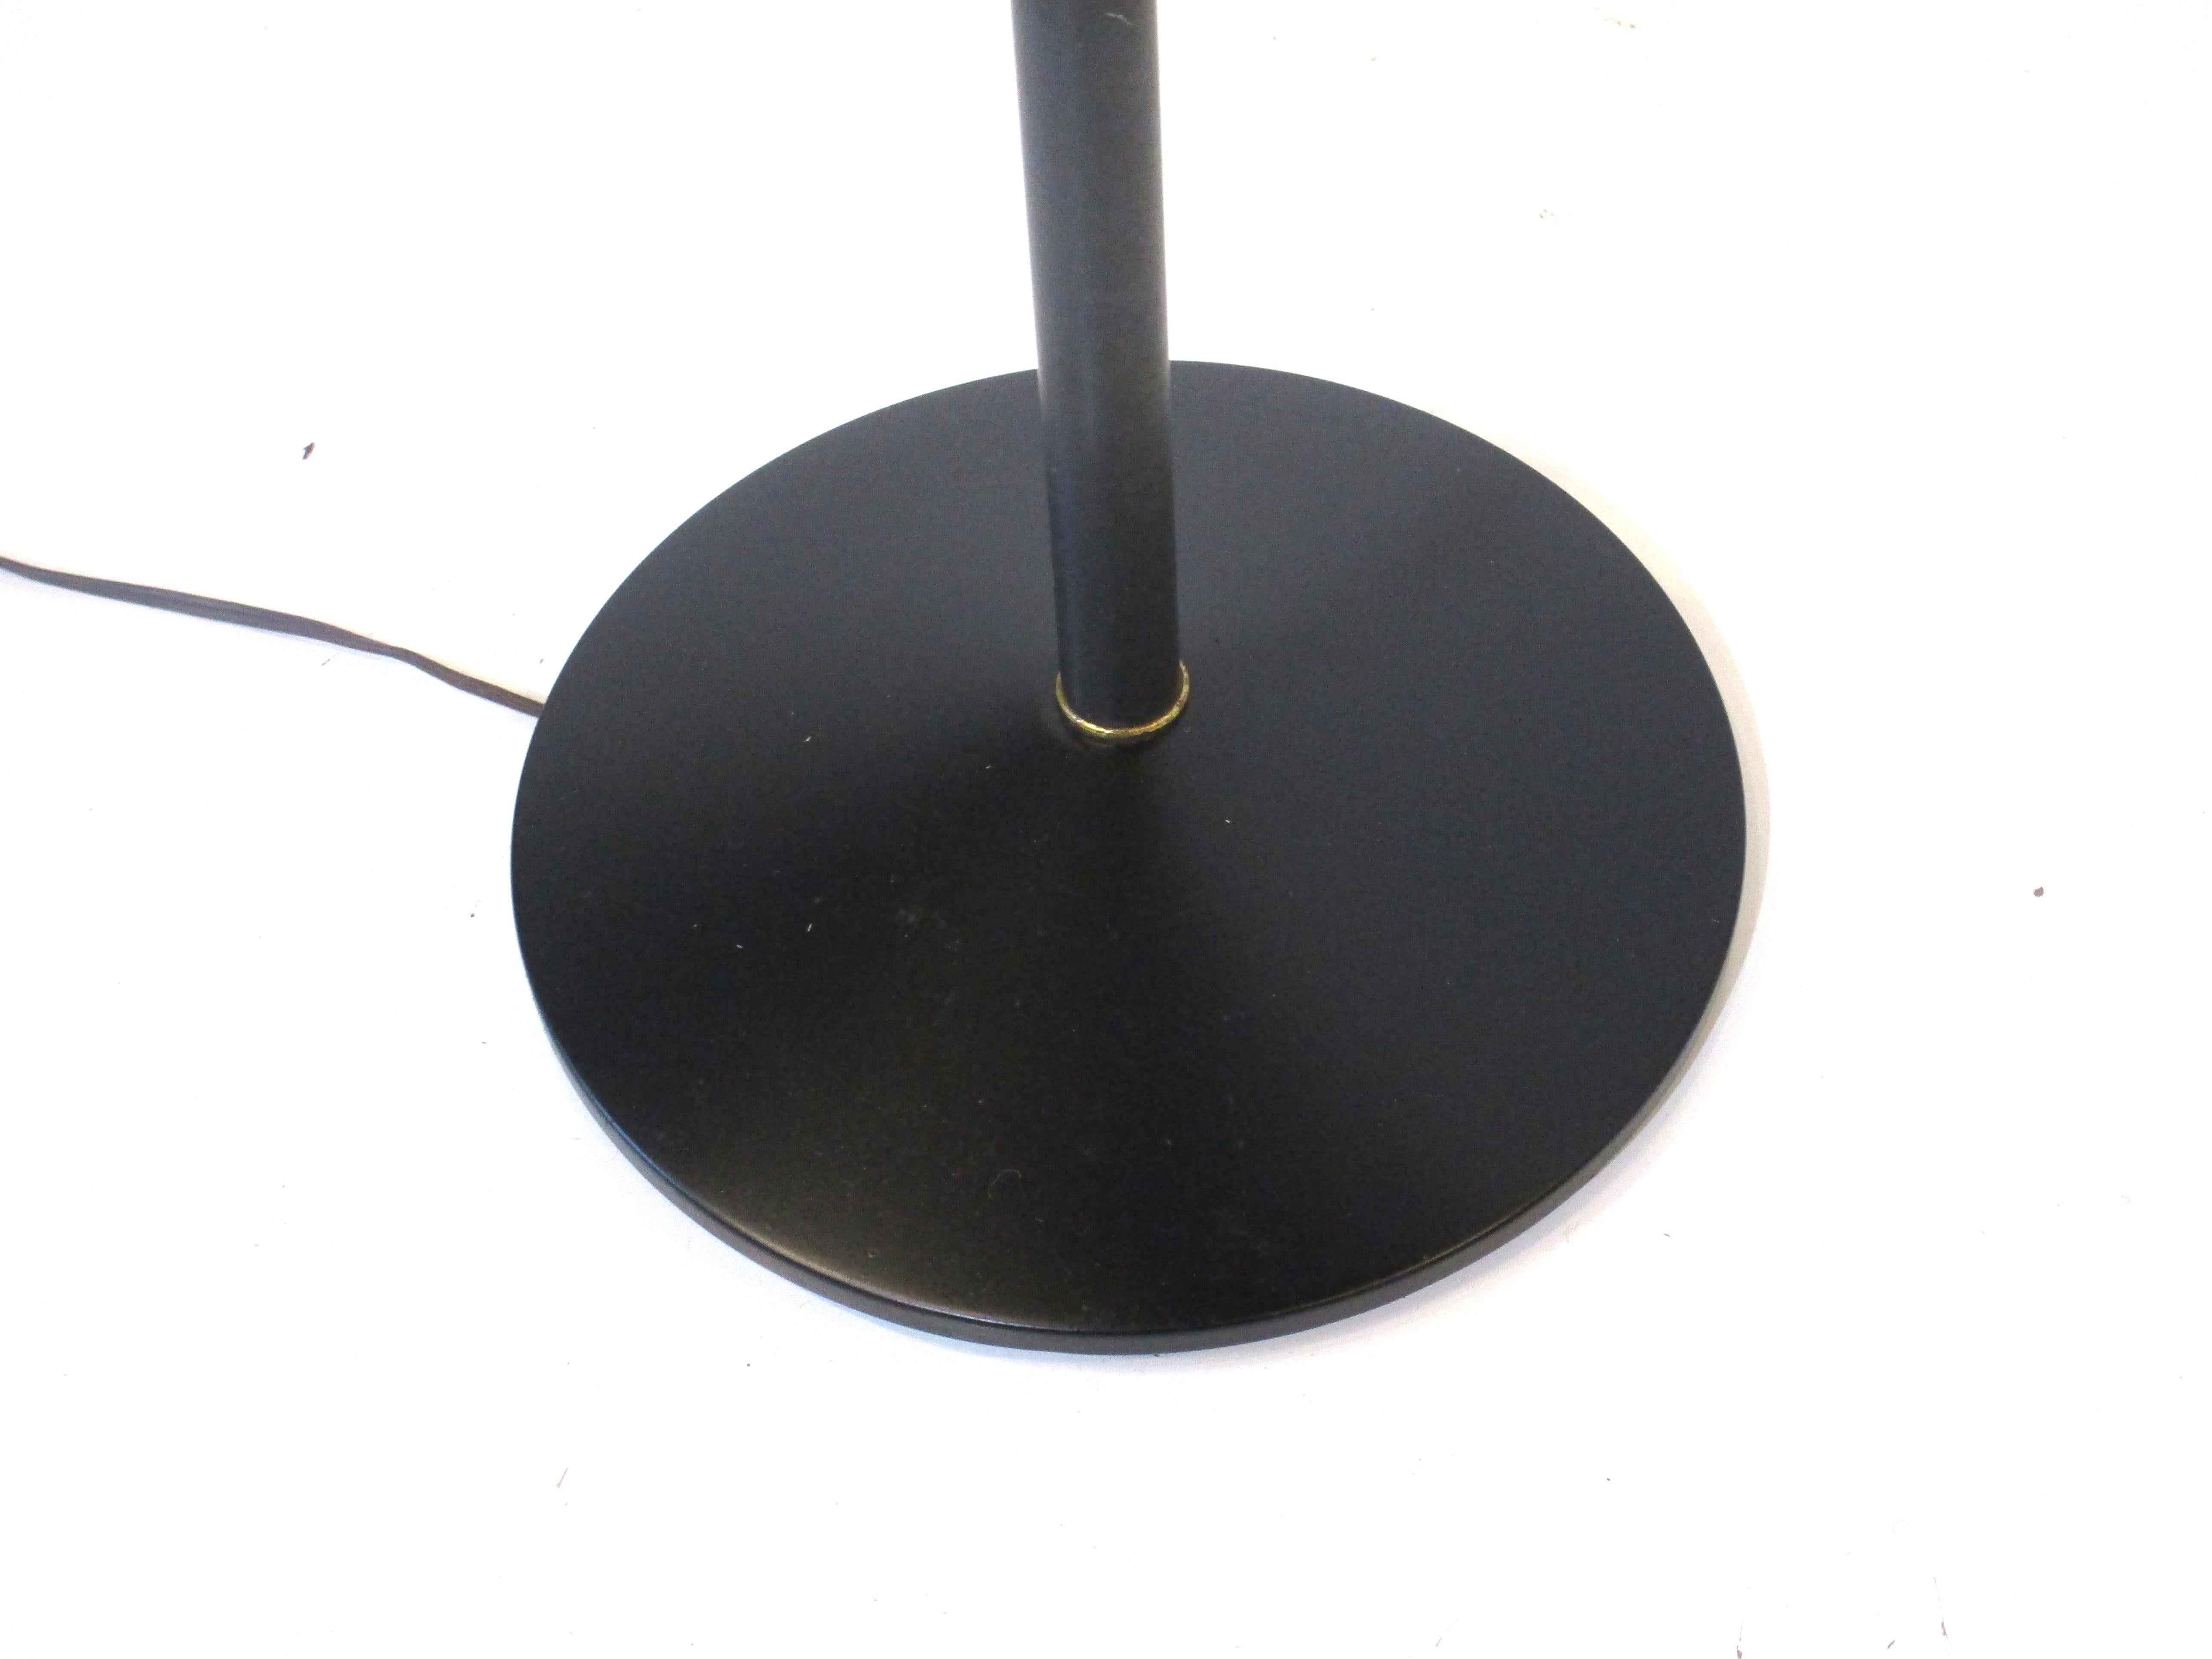 Lightolier 3 Shade Pole Floor Lamp by Gerald Thurston In Good Condition For Sale In Cincinnati, OH